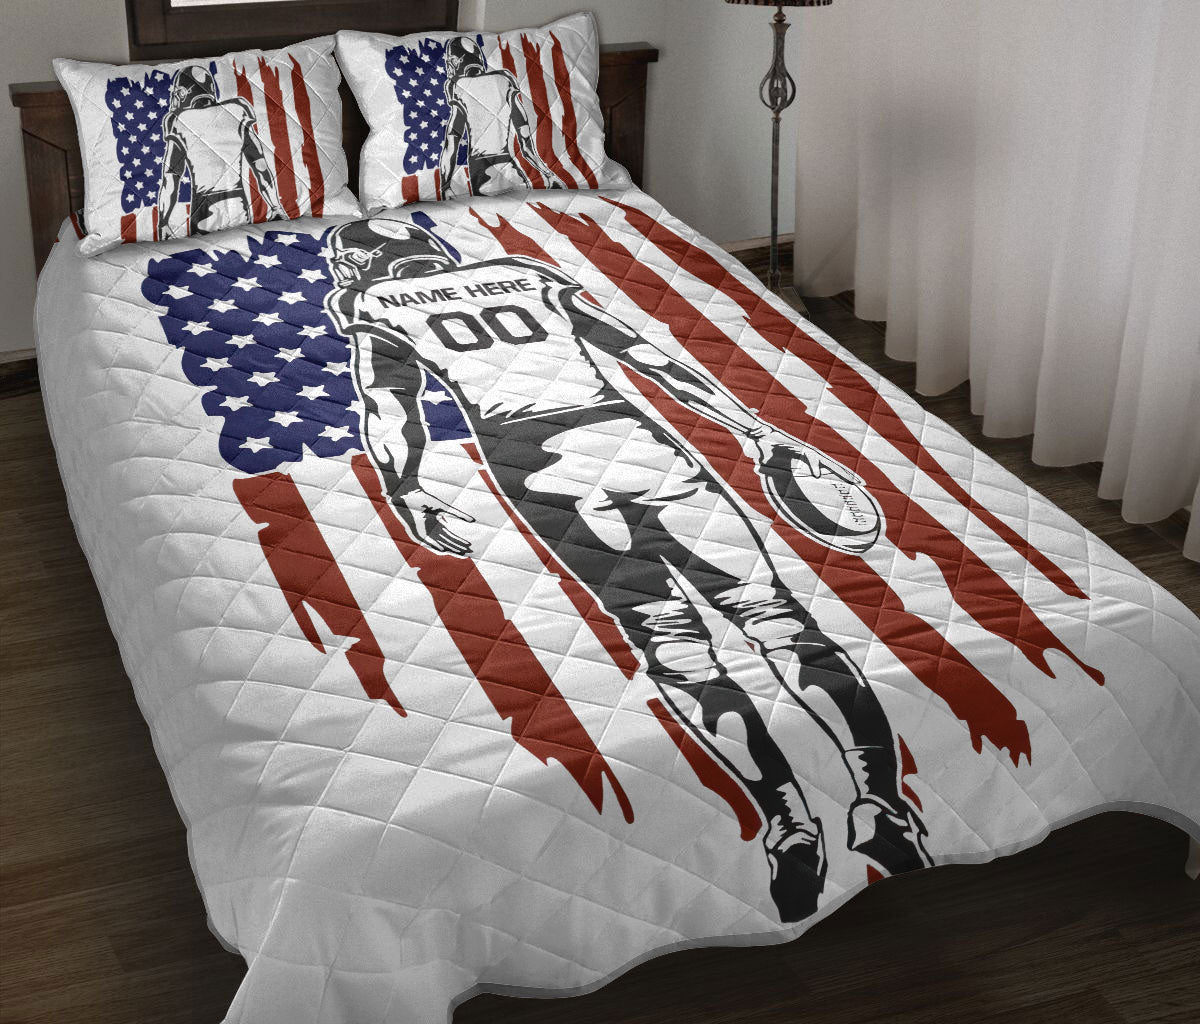 Ohaprints-Quilt-Bed-Set-Pillowcase-Football-Player-Us-American-Flag-Sport-Gift-Custom-Personalized-Name-Number-Blanket-Bedspread-Bedding-3142-Double (70'' x 80'')